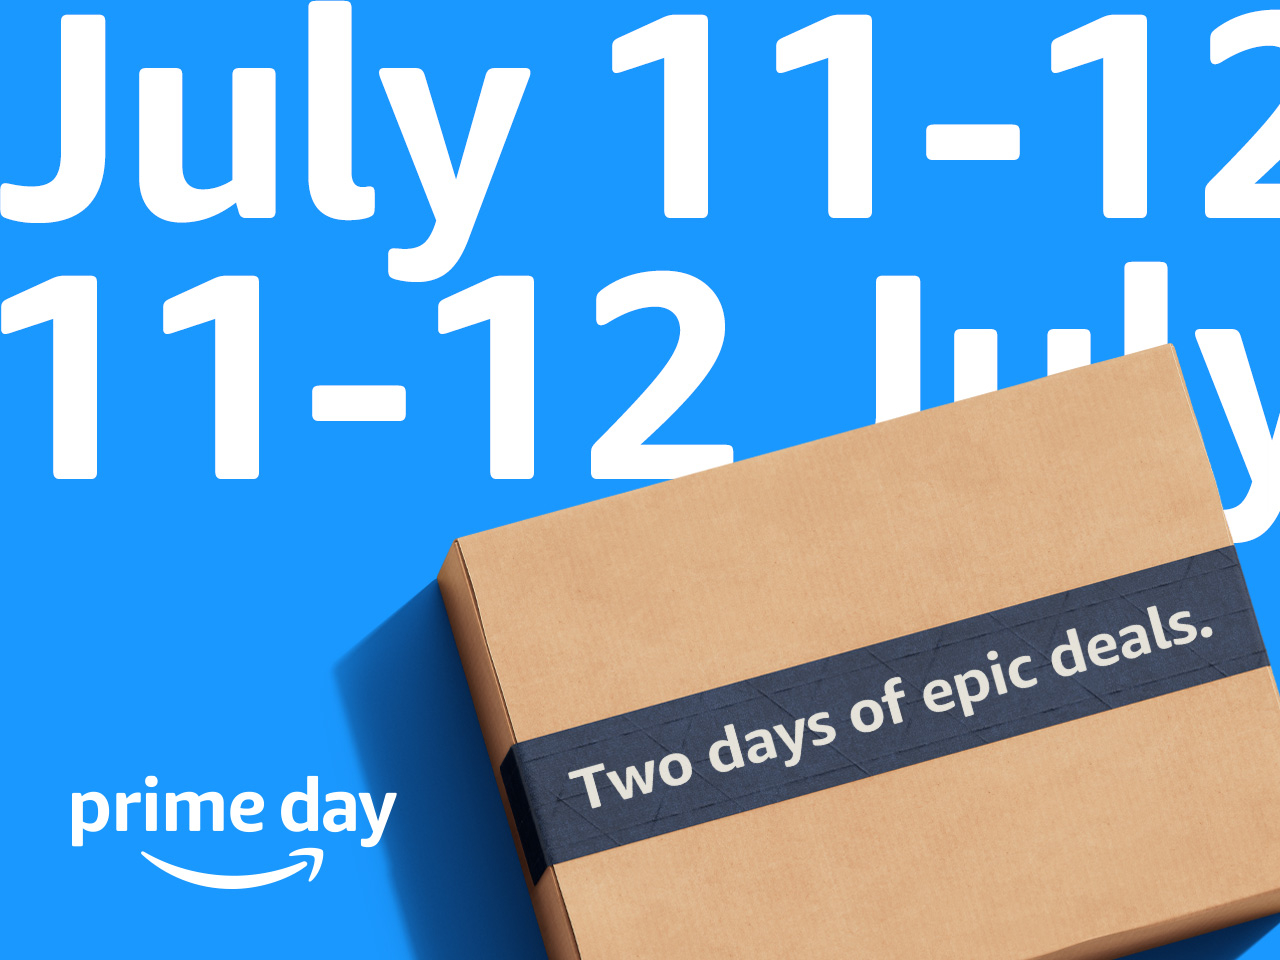 Prime Day Sale 30 Hours of Exclusive Launches & Deals Ad